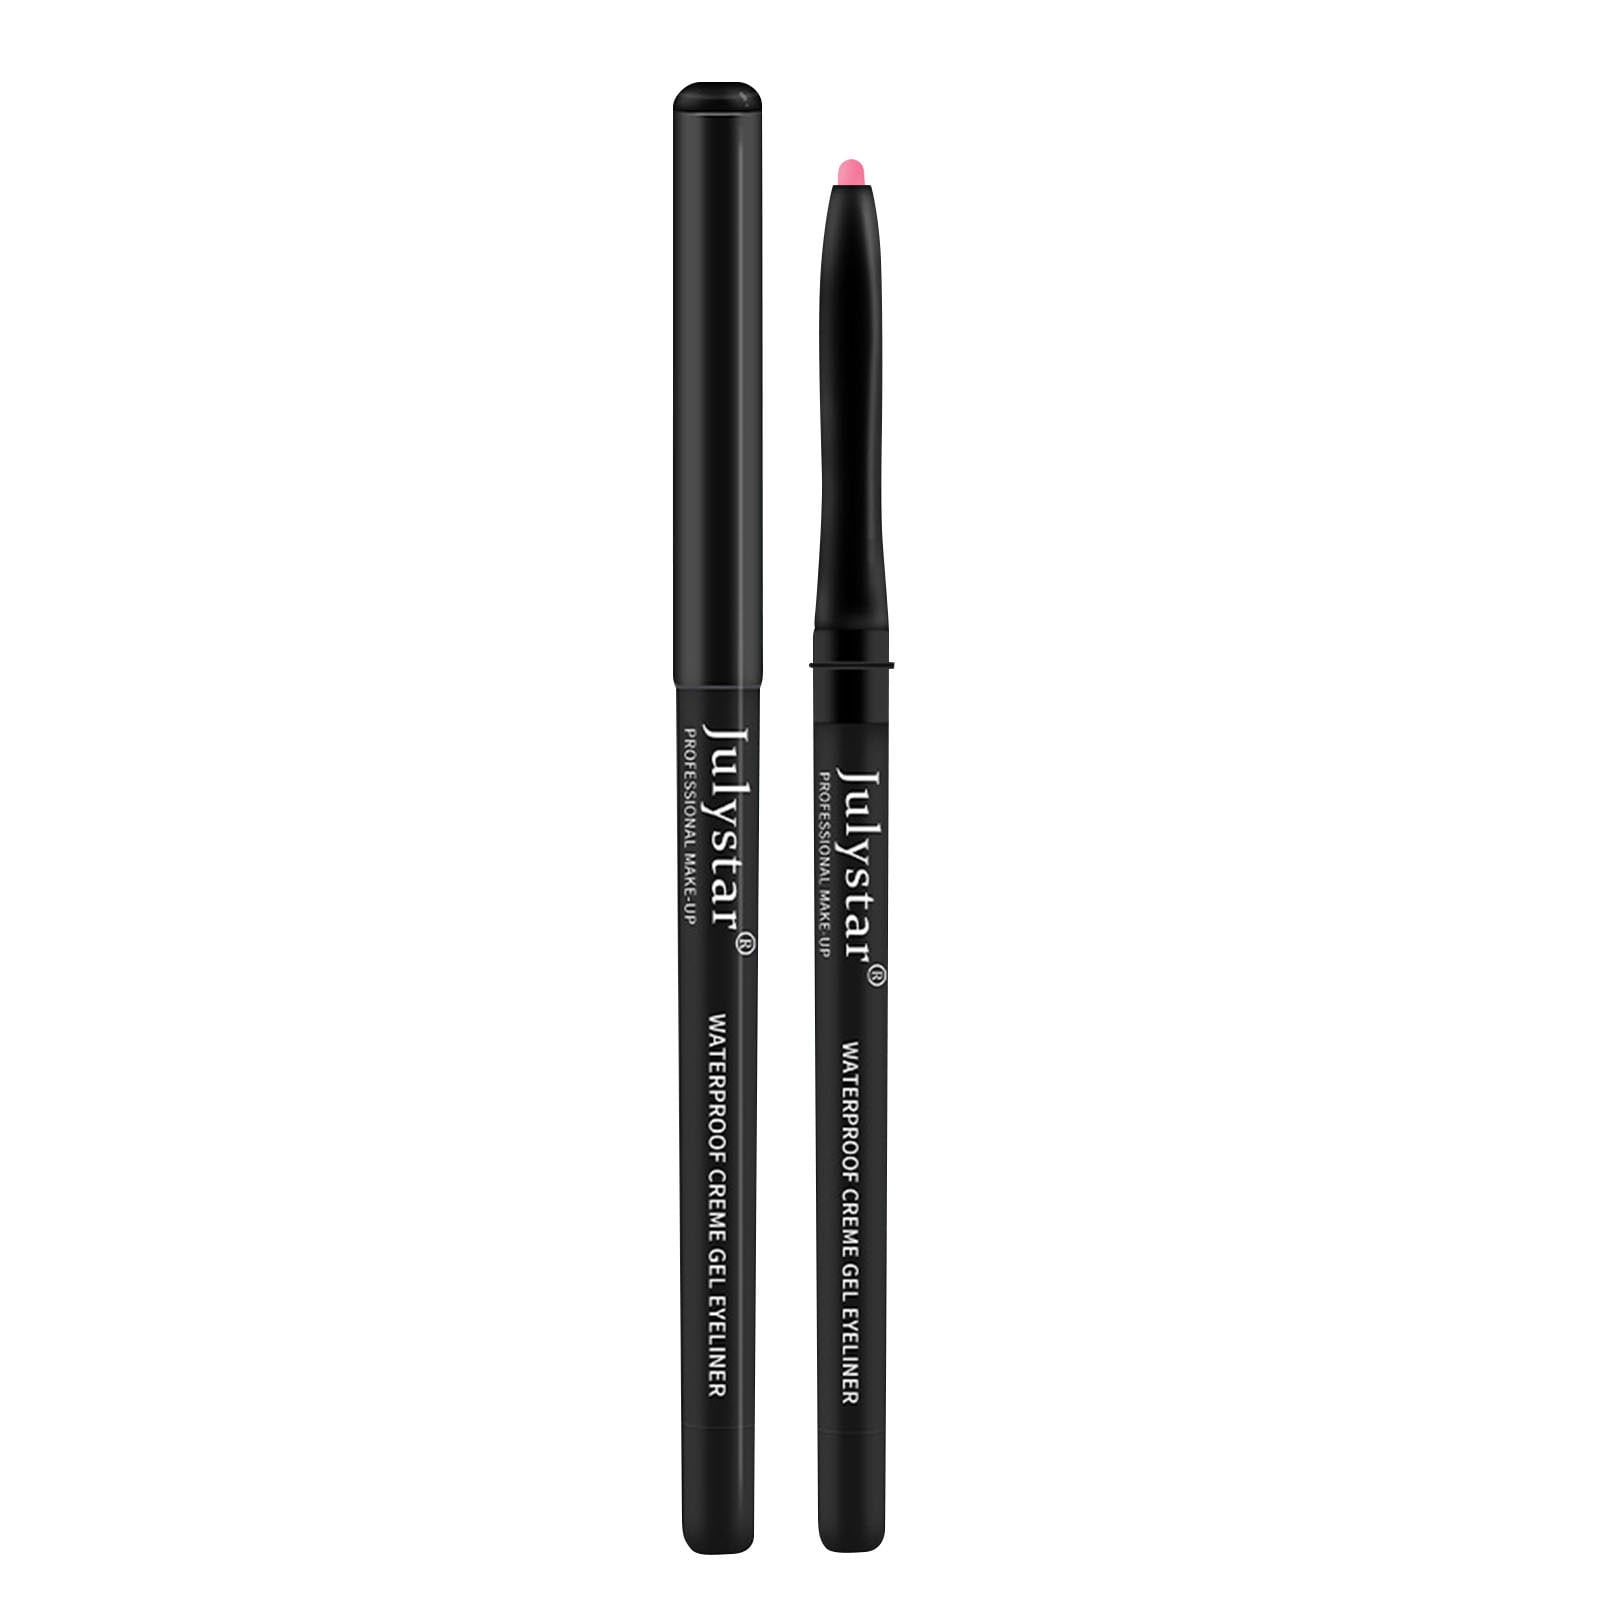 Byczx White Eyeliner Color Eyeliner Is Not Easy To Waterproof And Oil